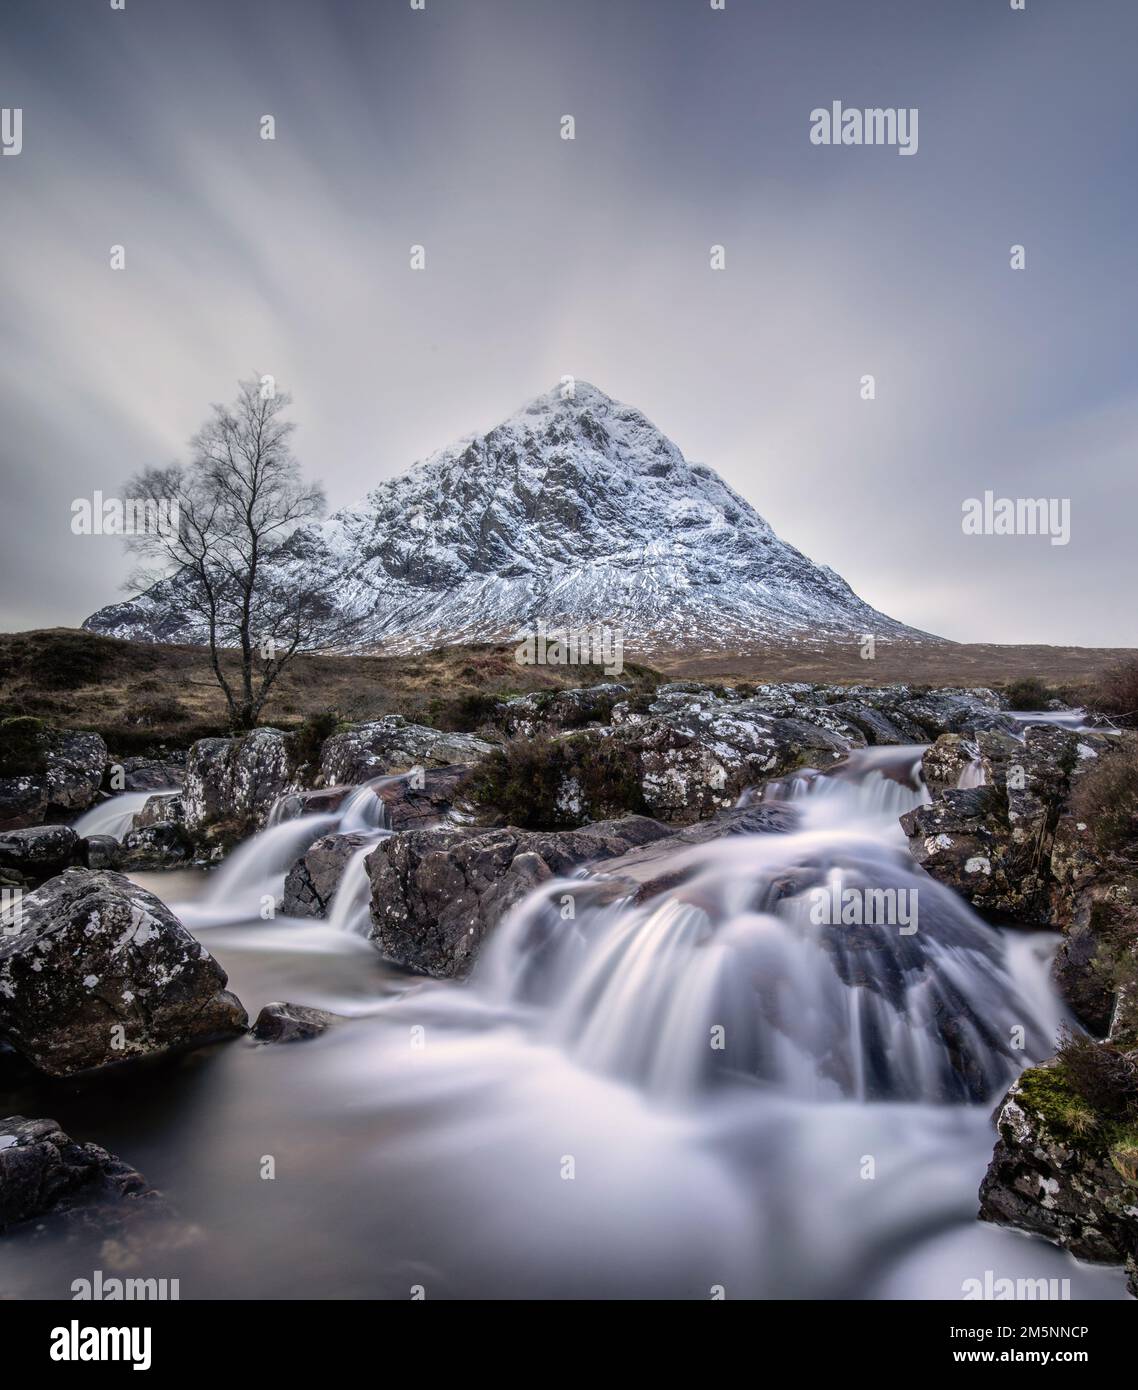 Glencoe waterfall and snow covered mountain in the Scottish Highlands. Rugged scenery and landscapes in the mountains near Loch Ness and Fort William. Stock Photo